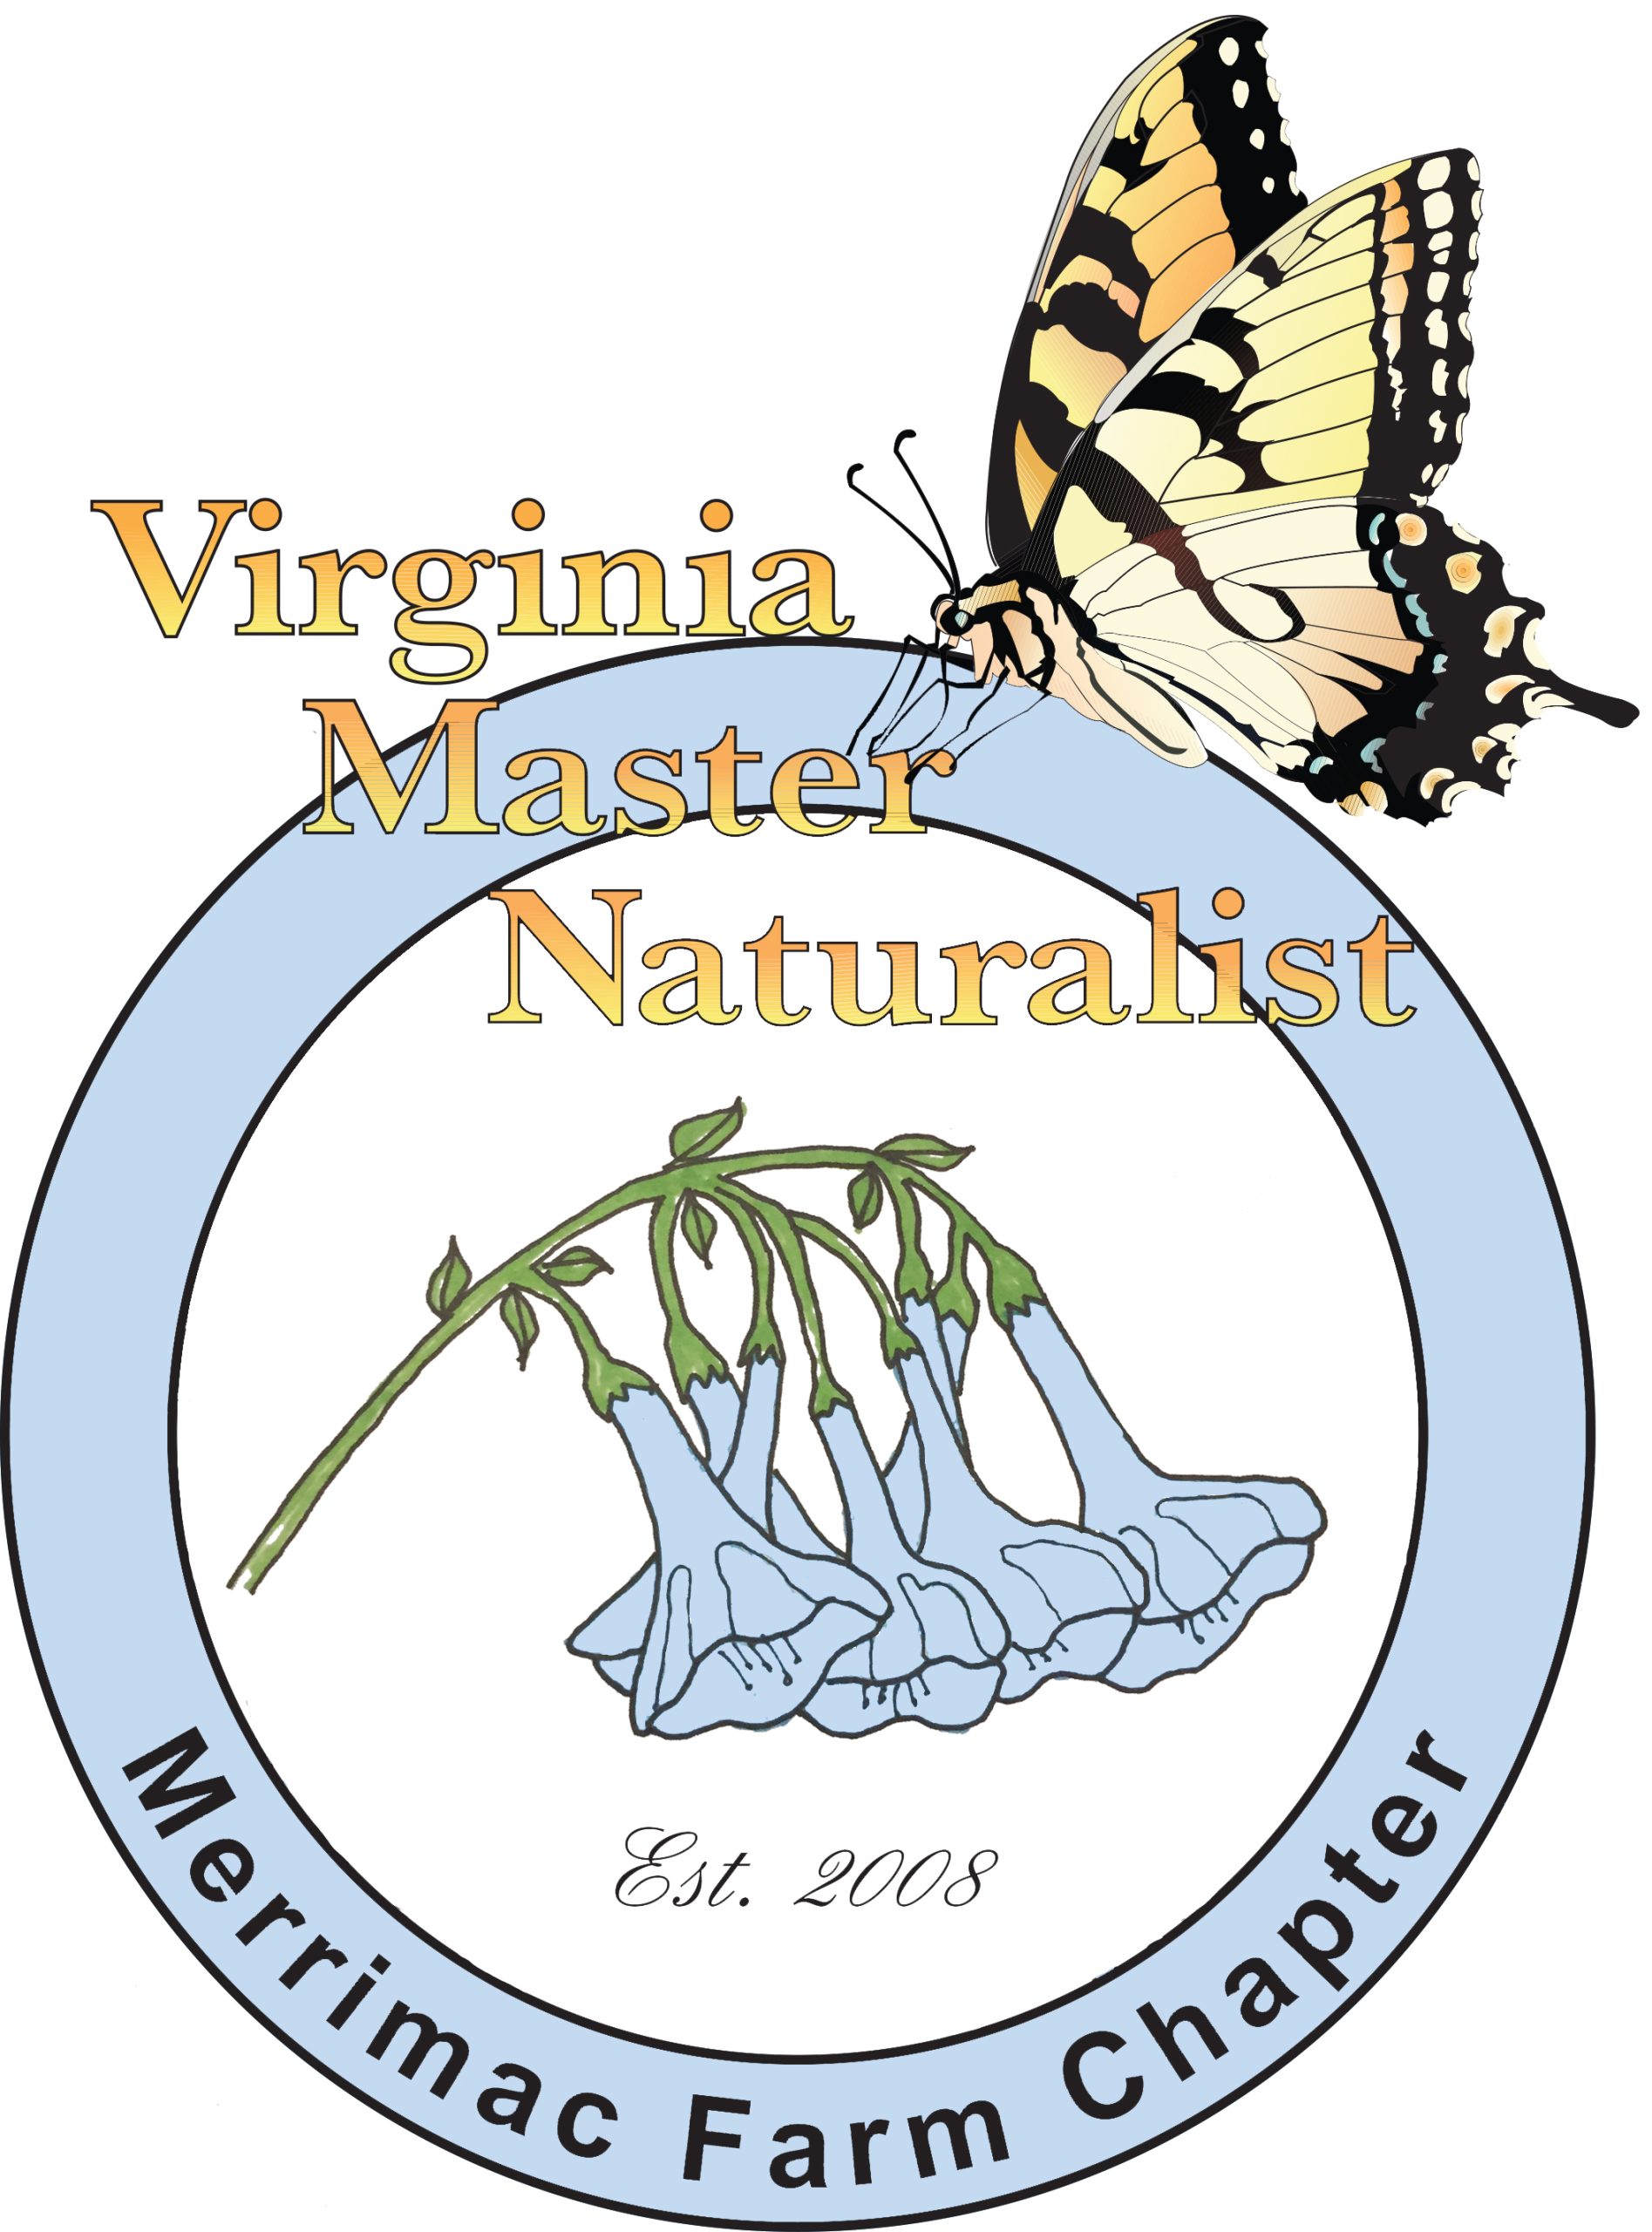 VMN Merrimac Farm Chapter Bluebell logo v7 15 2018 1 scaled - Become a Force for Nature! Become a Master Naturalist!